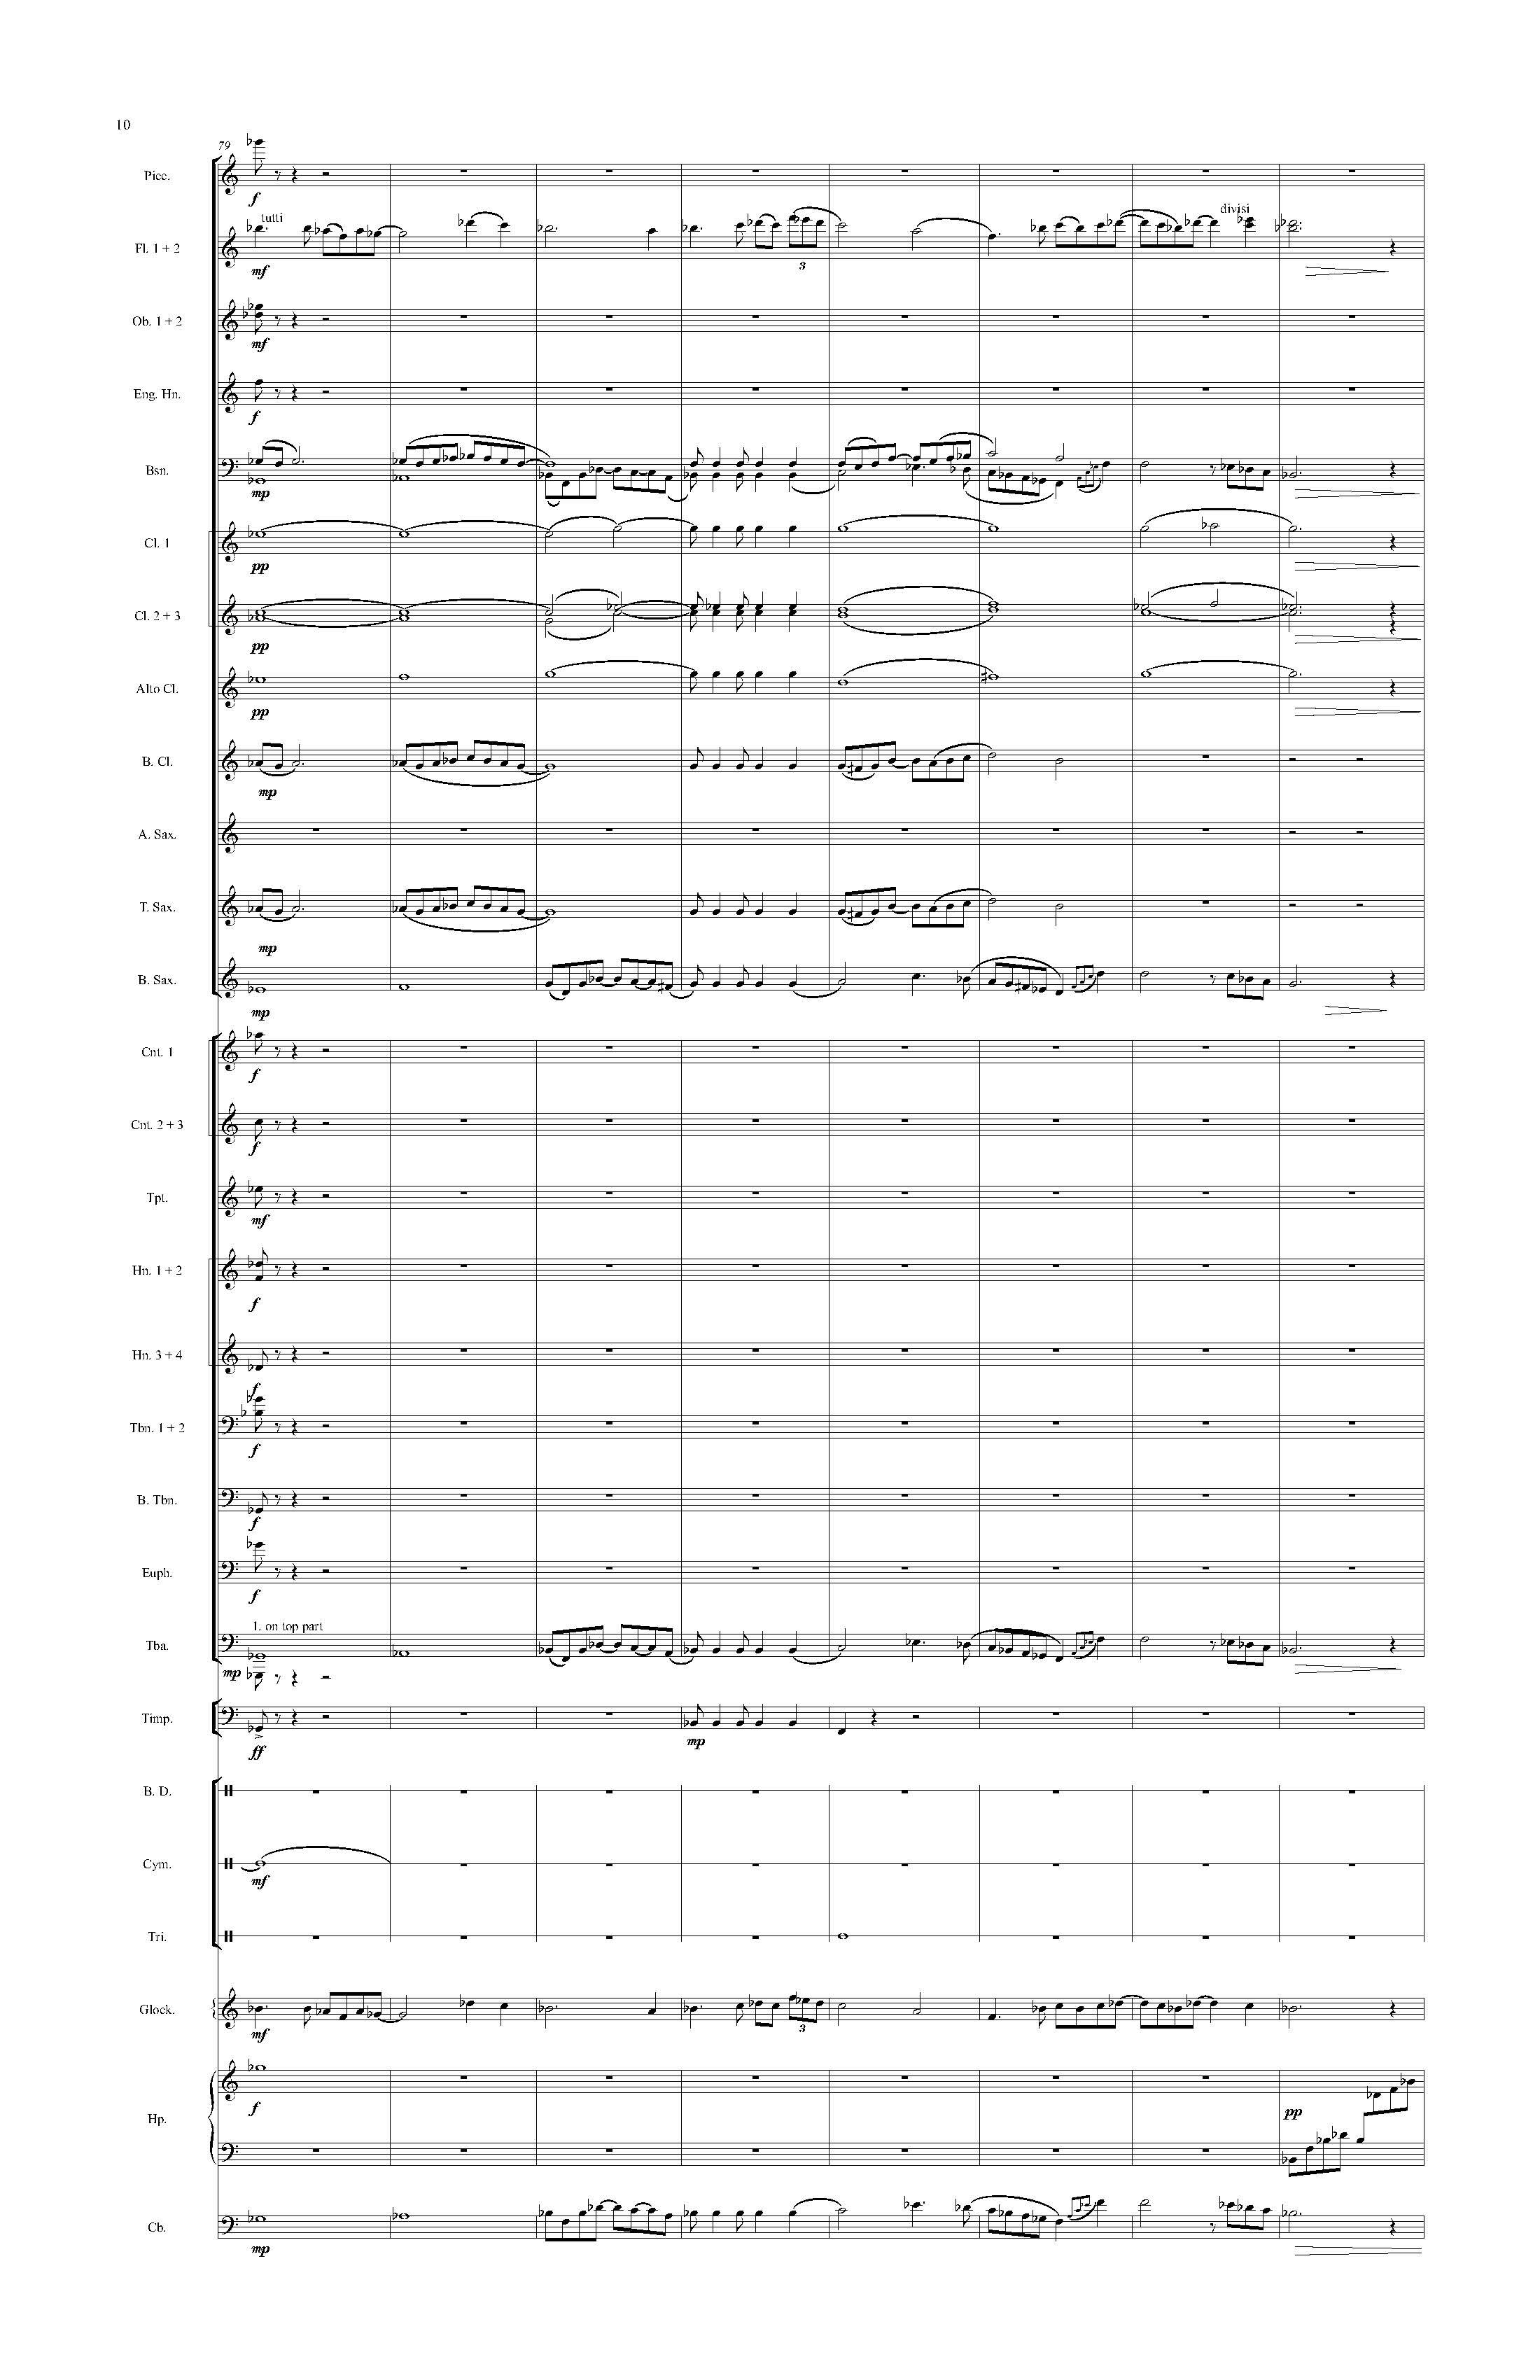 Psyche - Complete Score_Page_16.jpg